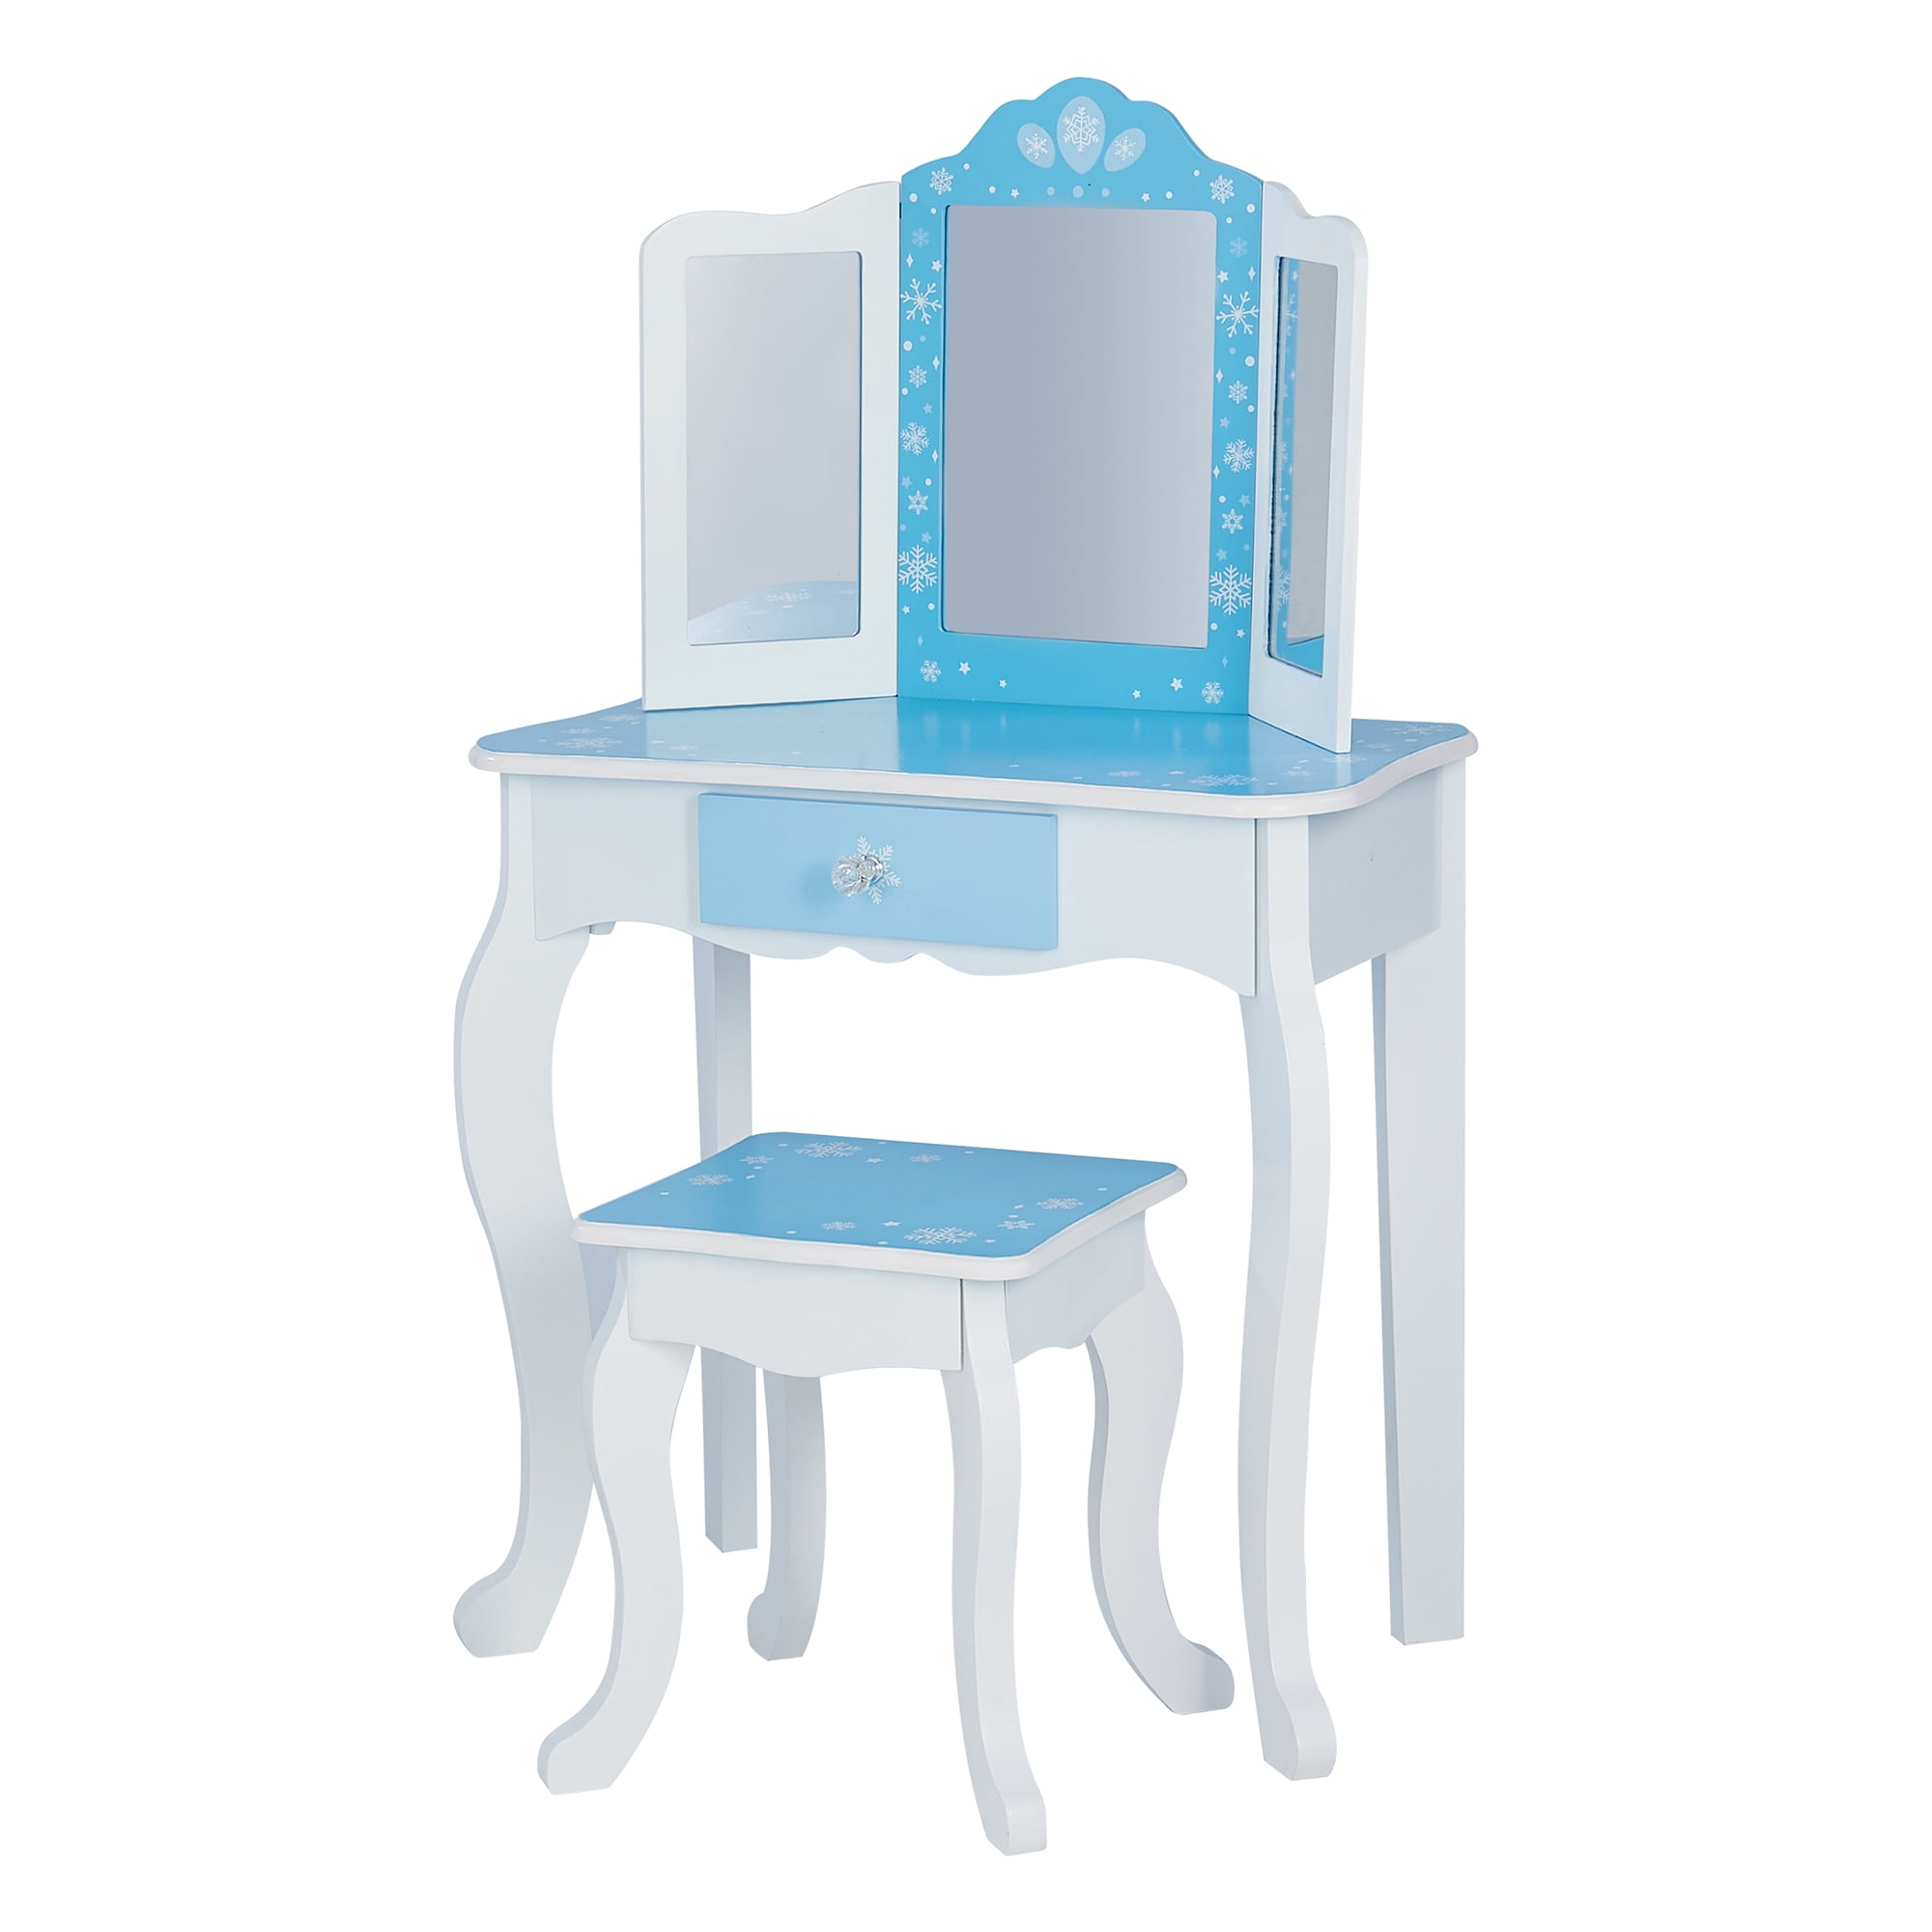 Fantasy Fields By Teamson Kids Gisele Wooden Vanity And Chair Makeup Desk Set With Mirror And Stool